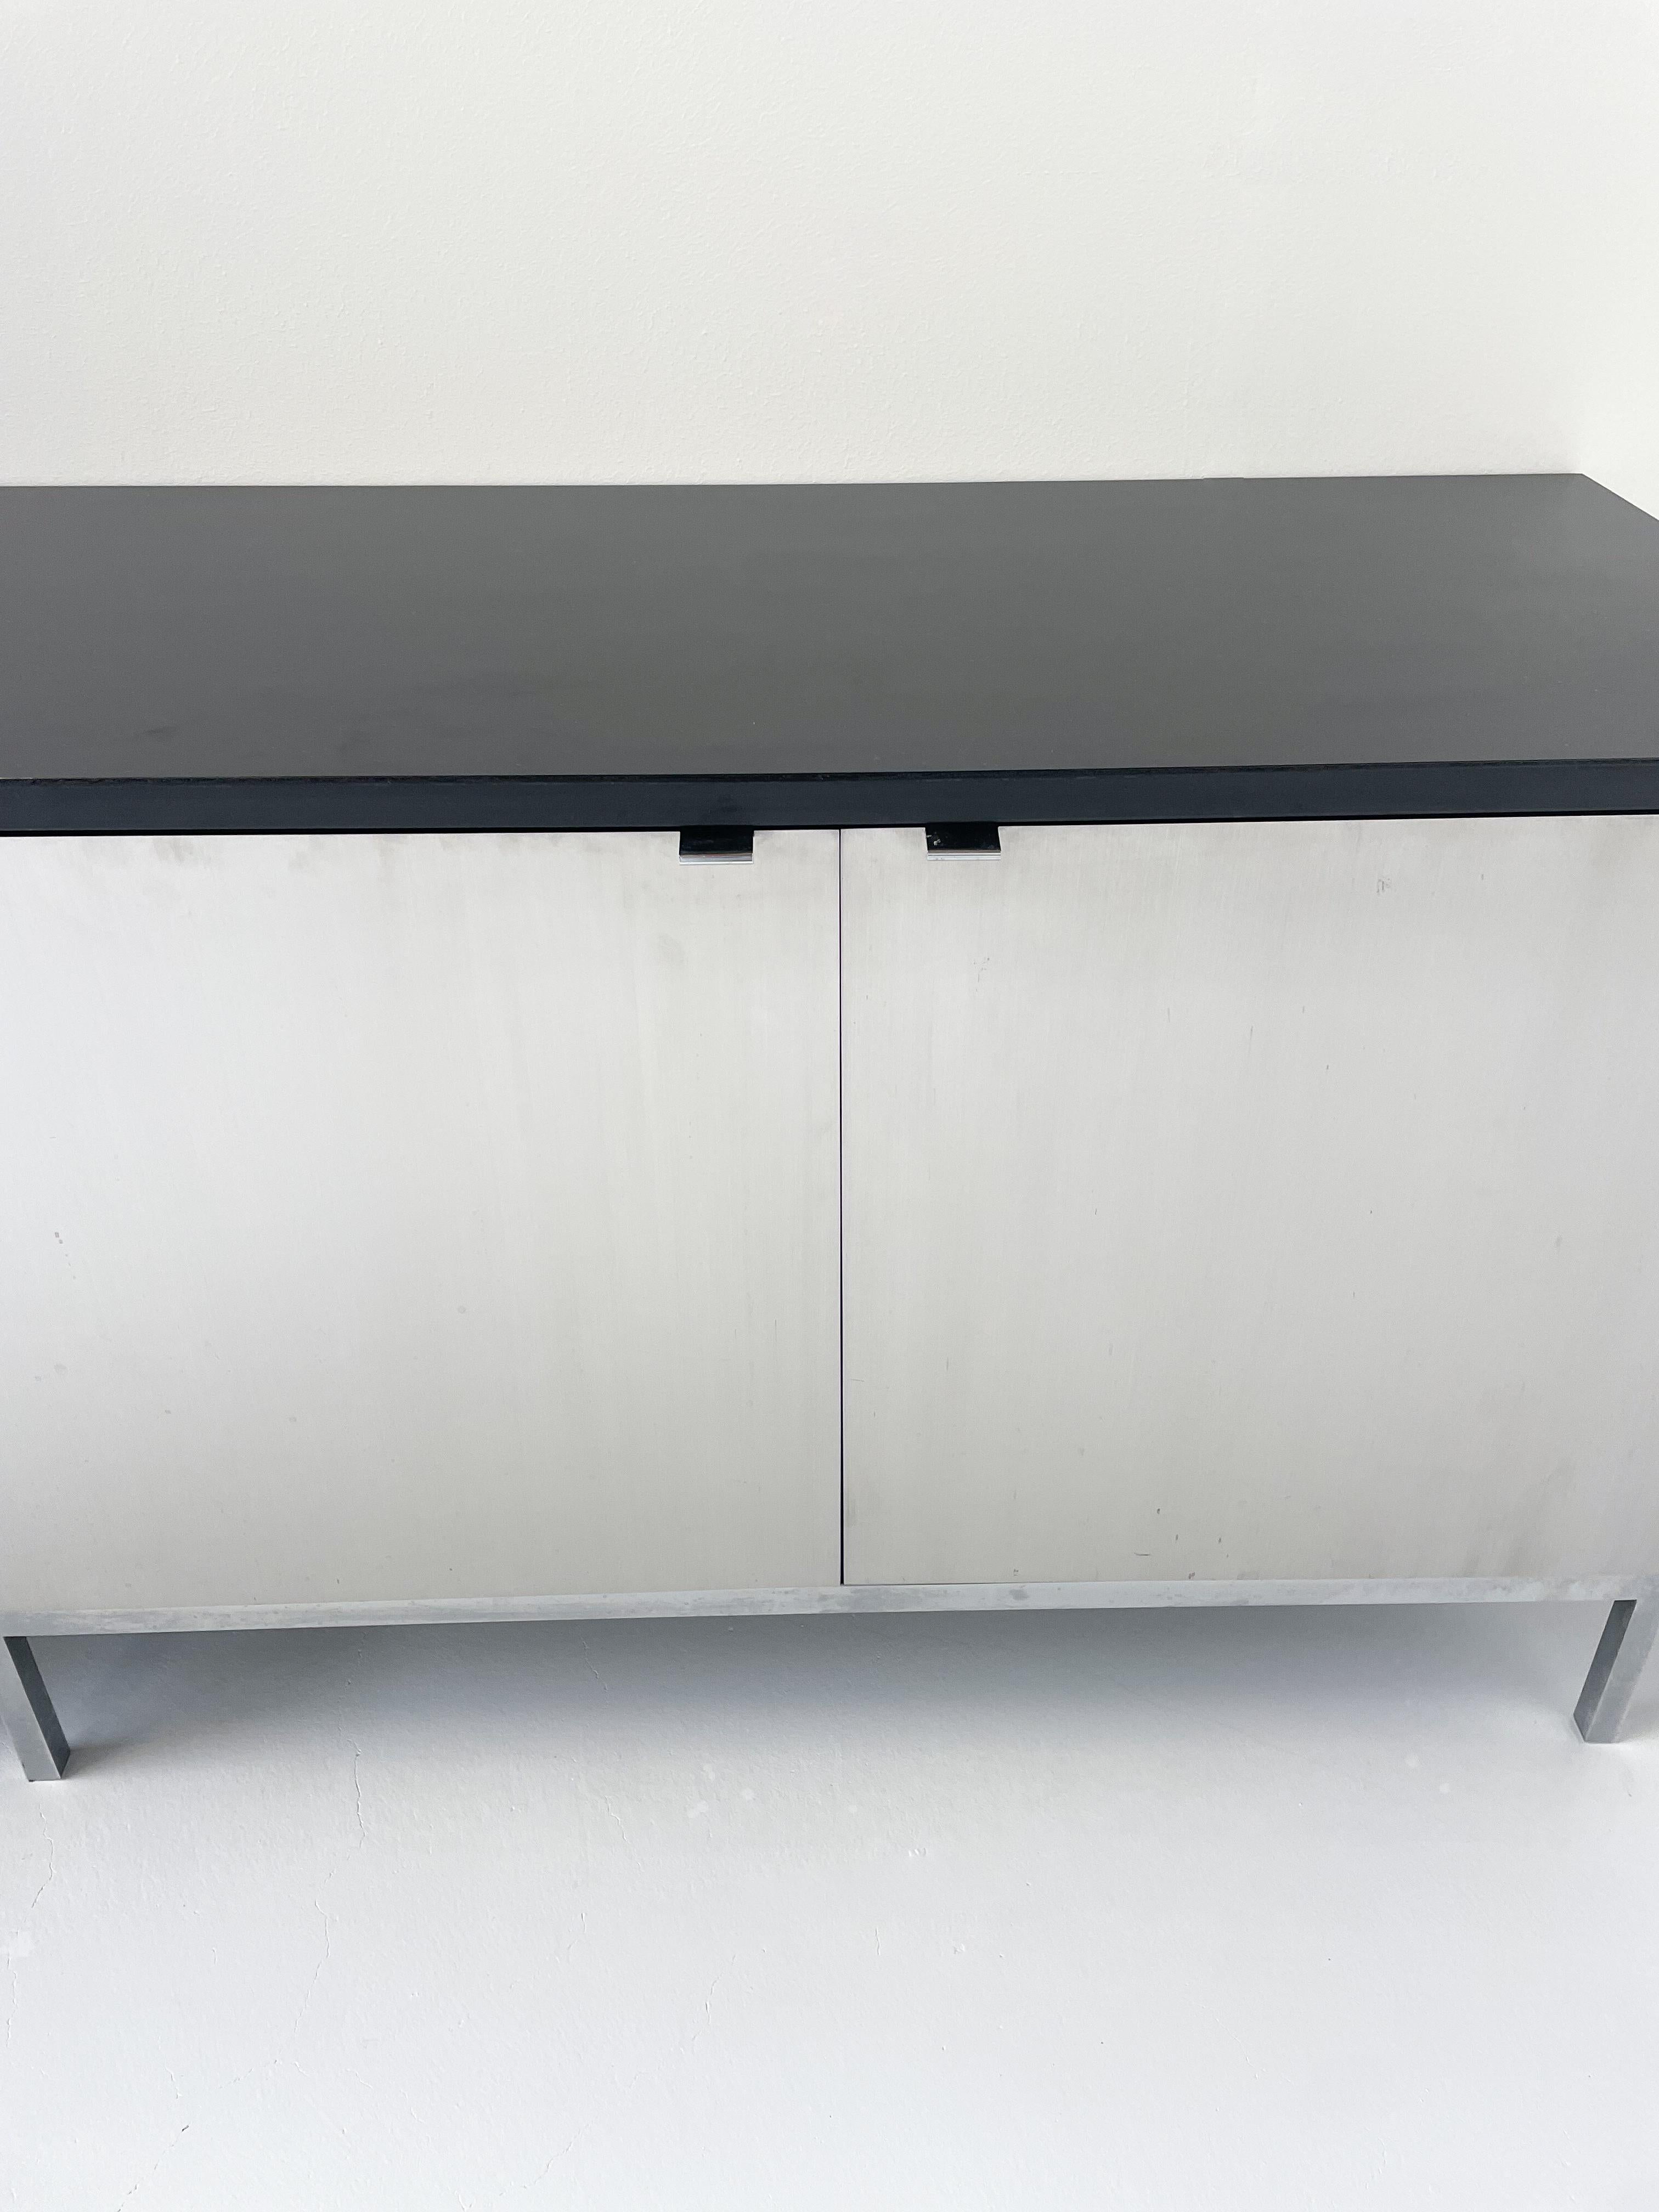 Mid-Century Modern Florence Knoll Sideboard, Aluminium and Wood, 1960s For Sale 1